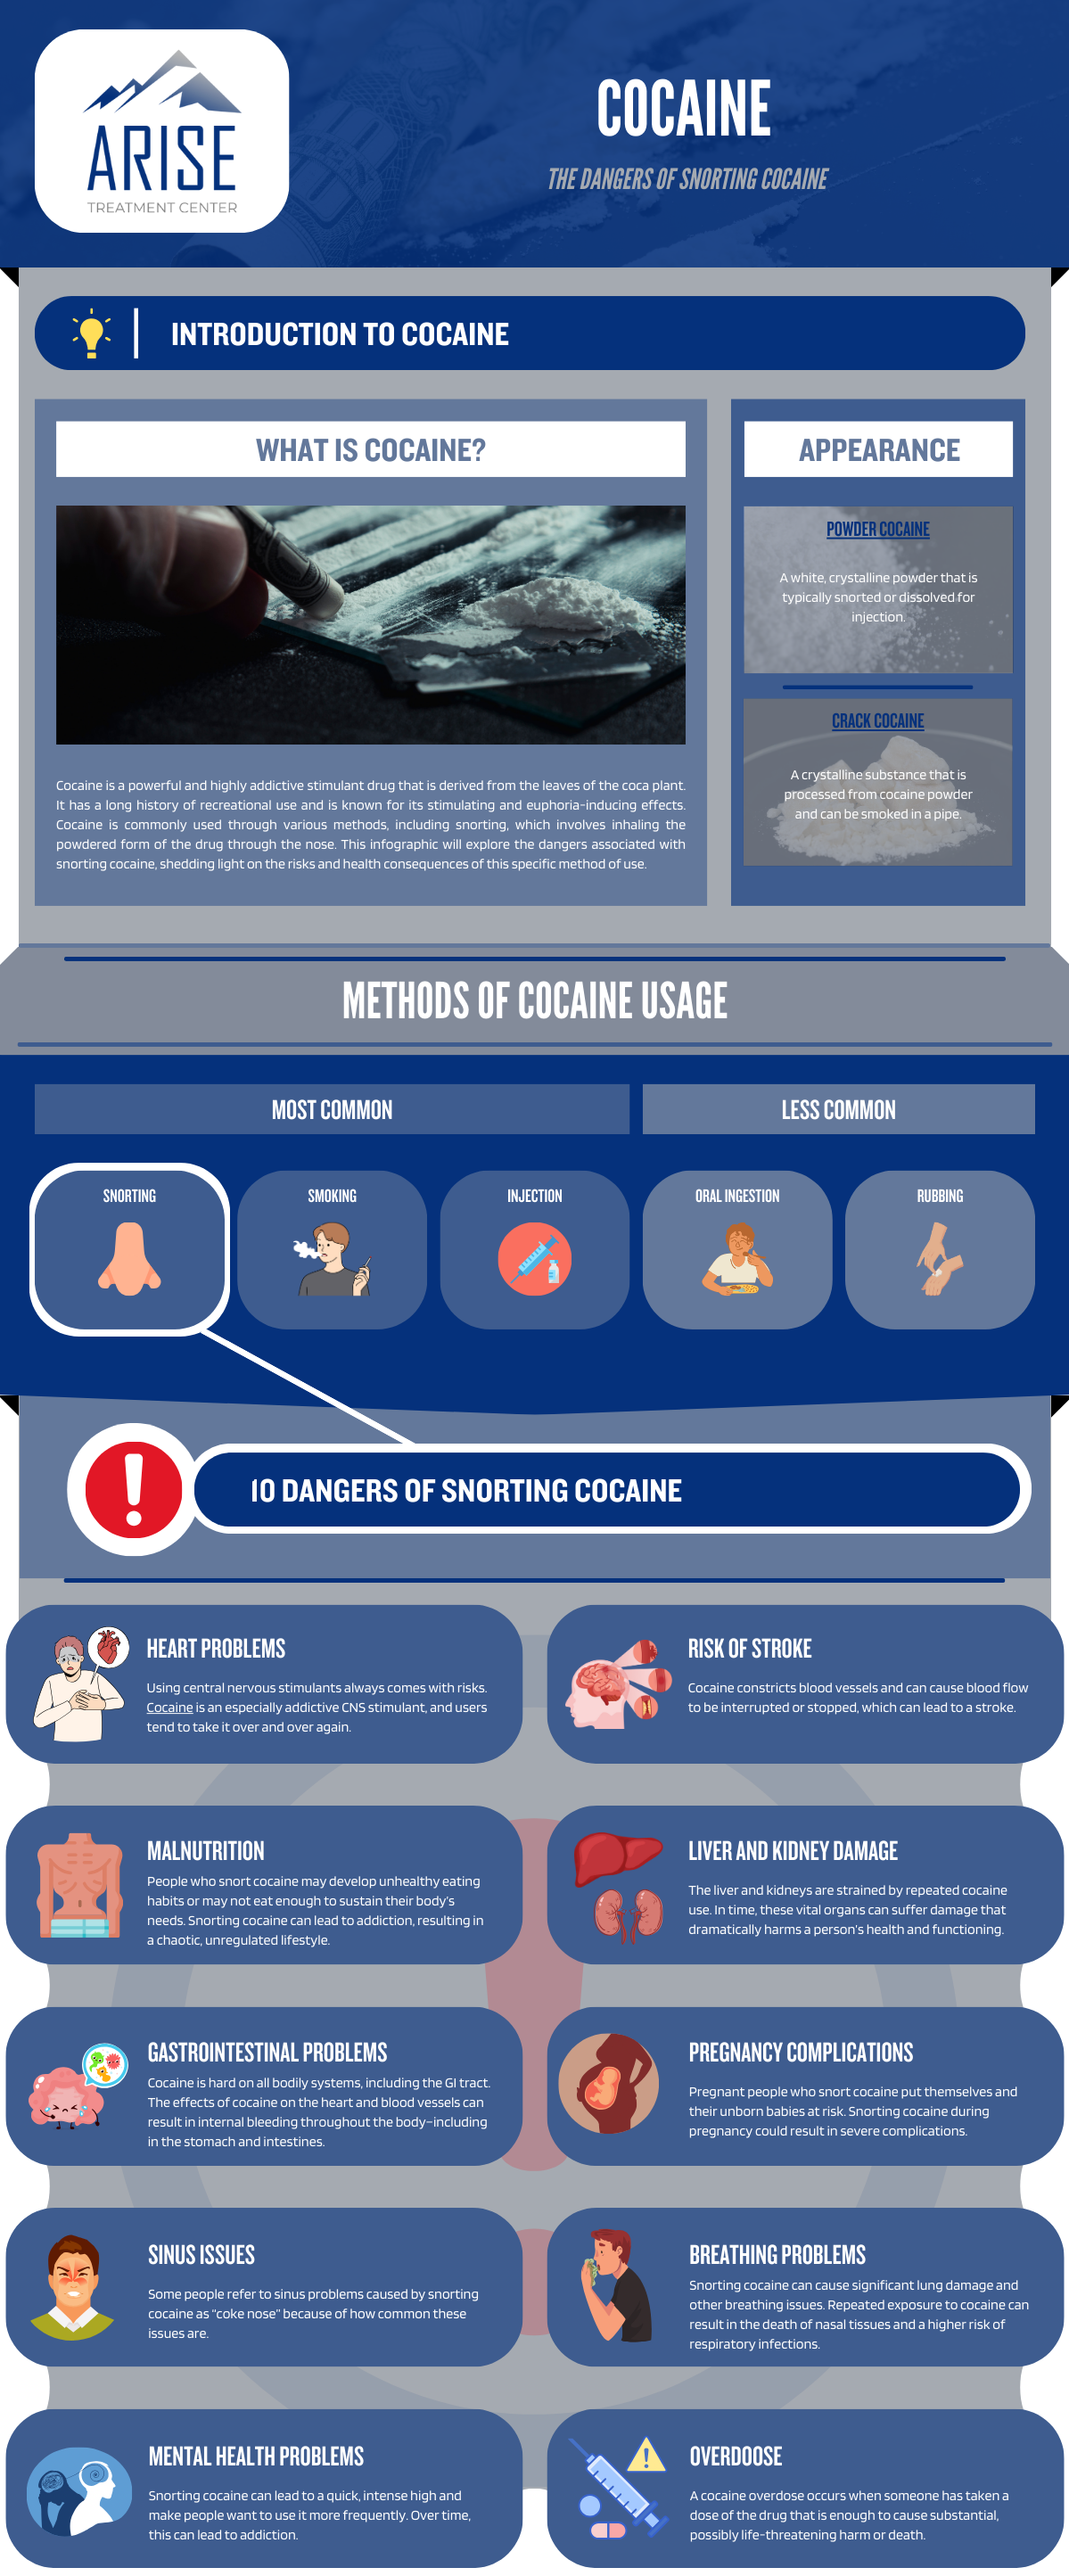 The Dangers of Snorting Cocaine